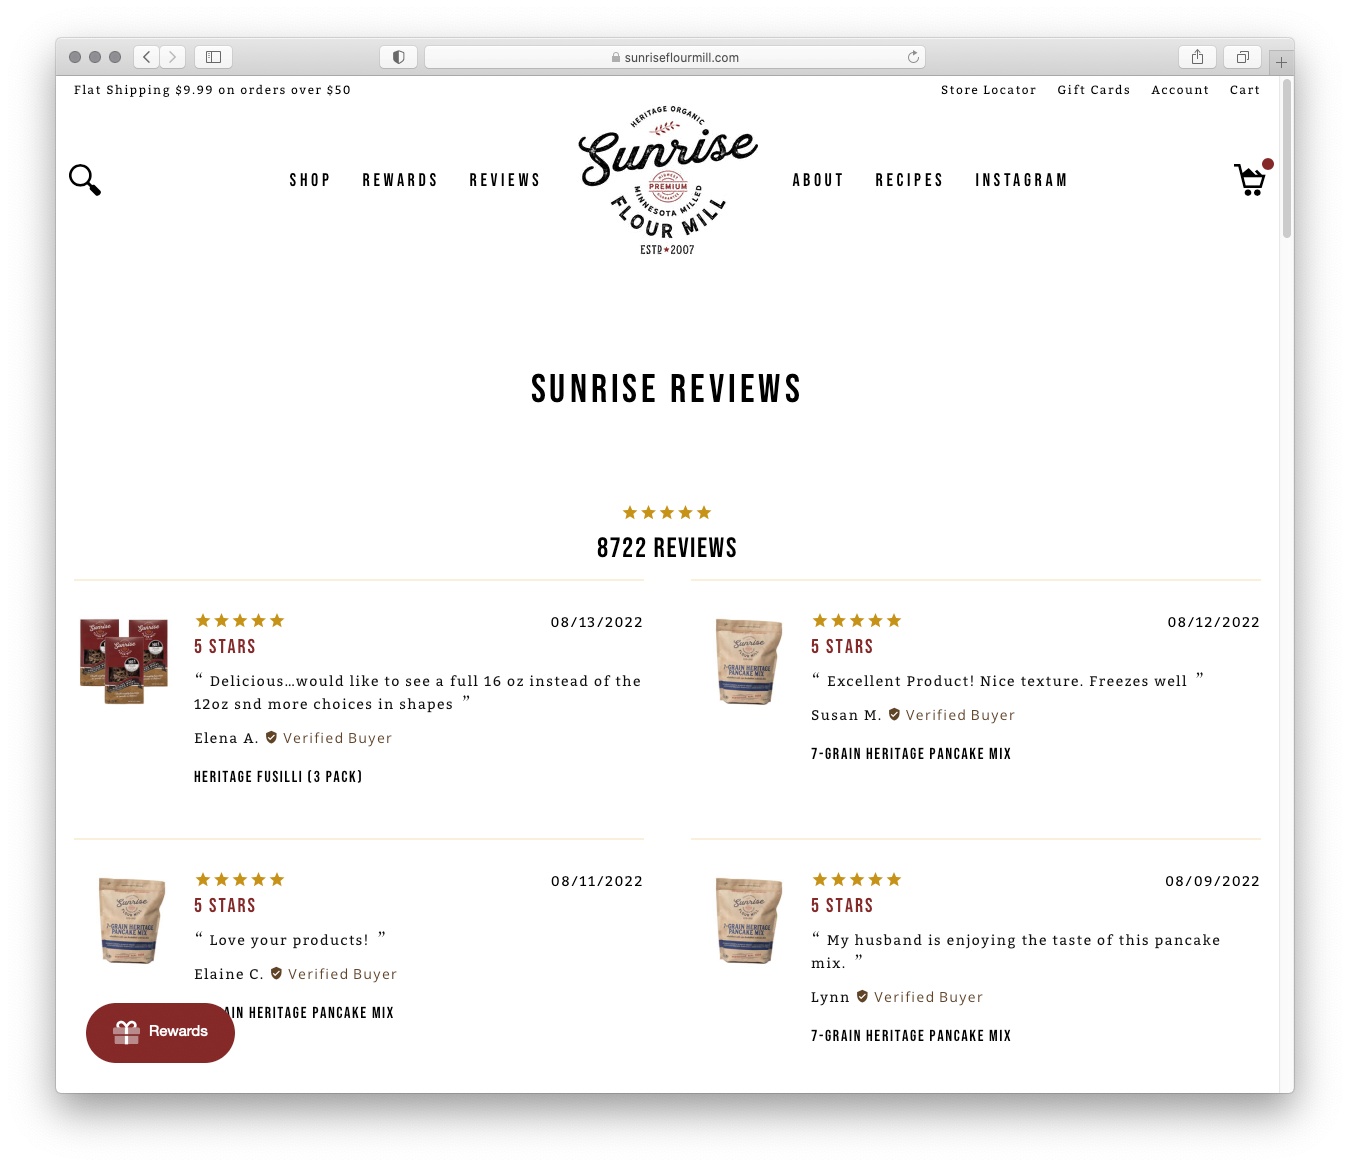 Reviews page